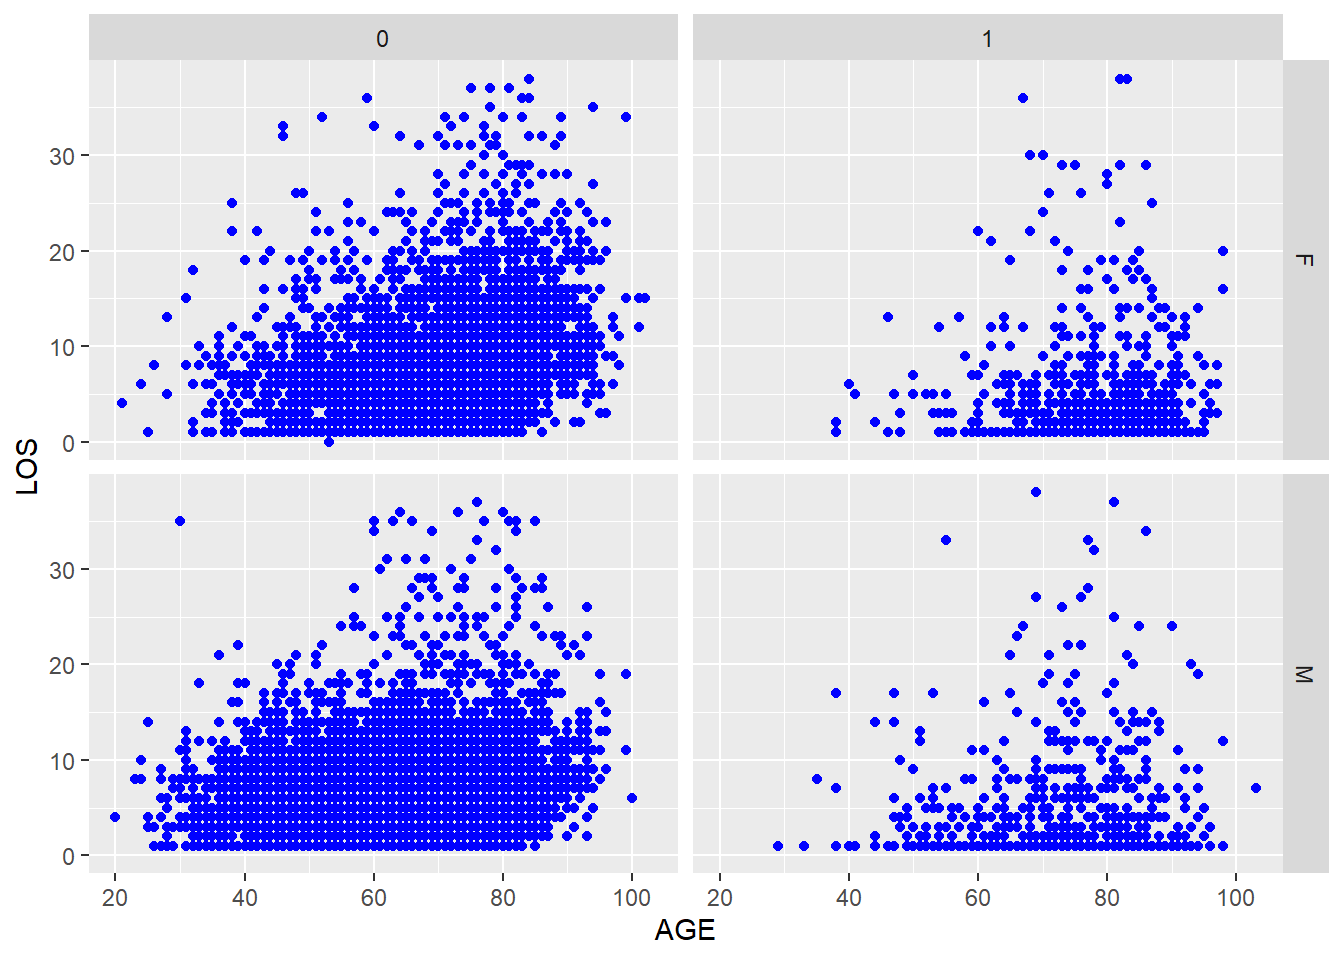 A scatter plot of LOS vs. AGE, using SEX and DIED as factors.